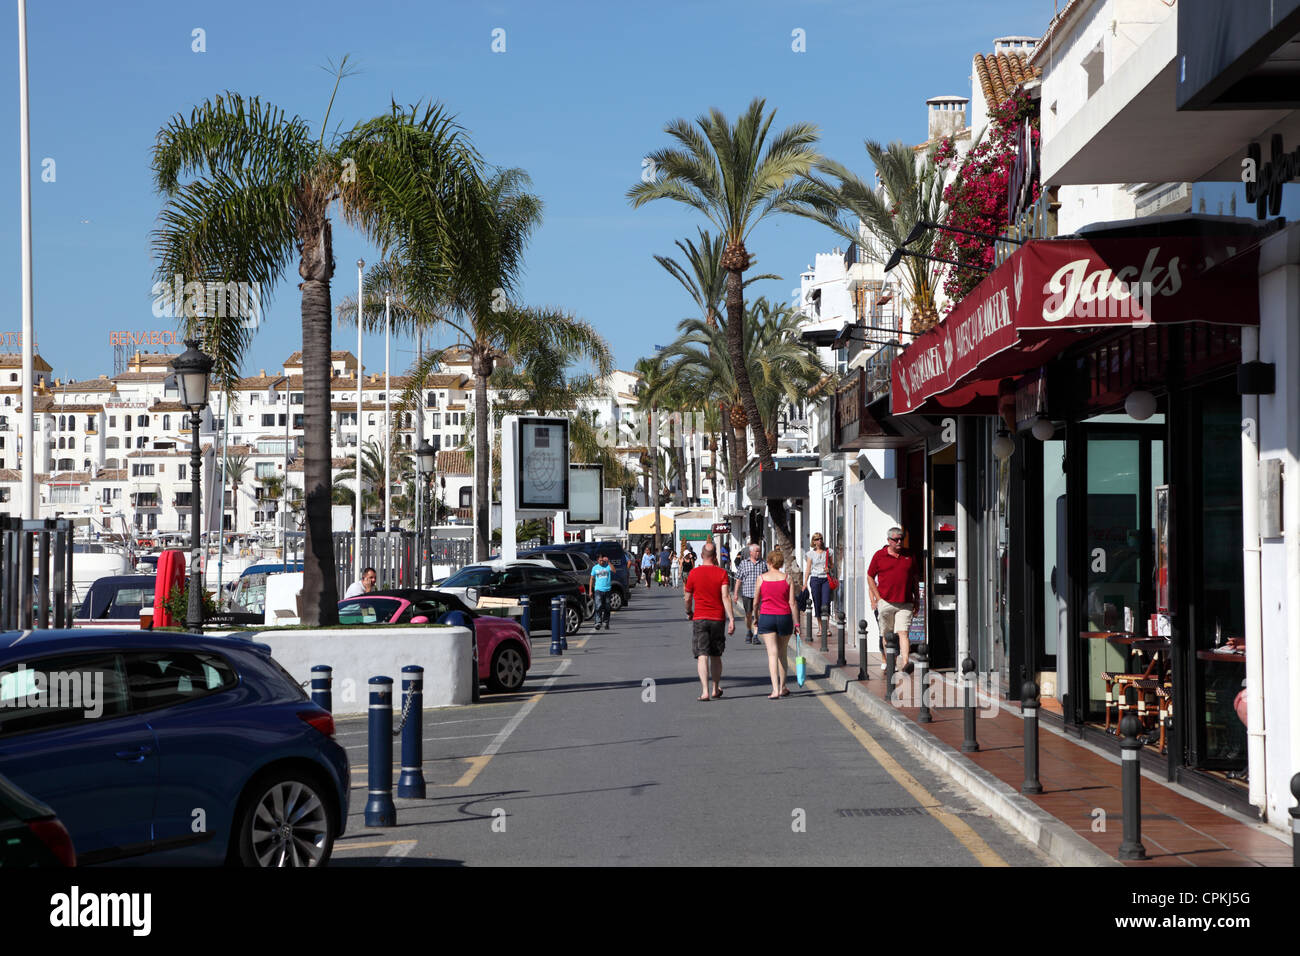 Puerto Banus, Spain - August 15, 2015: Shopping Center In Puerto Banus, A  Marina Near Marbella, Andalusia. Several Street Vendors Expect To Sell Your  Goods Stock Photo, Picture and Royalty Free Image. Image 46586477.